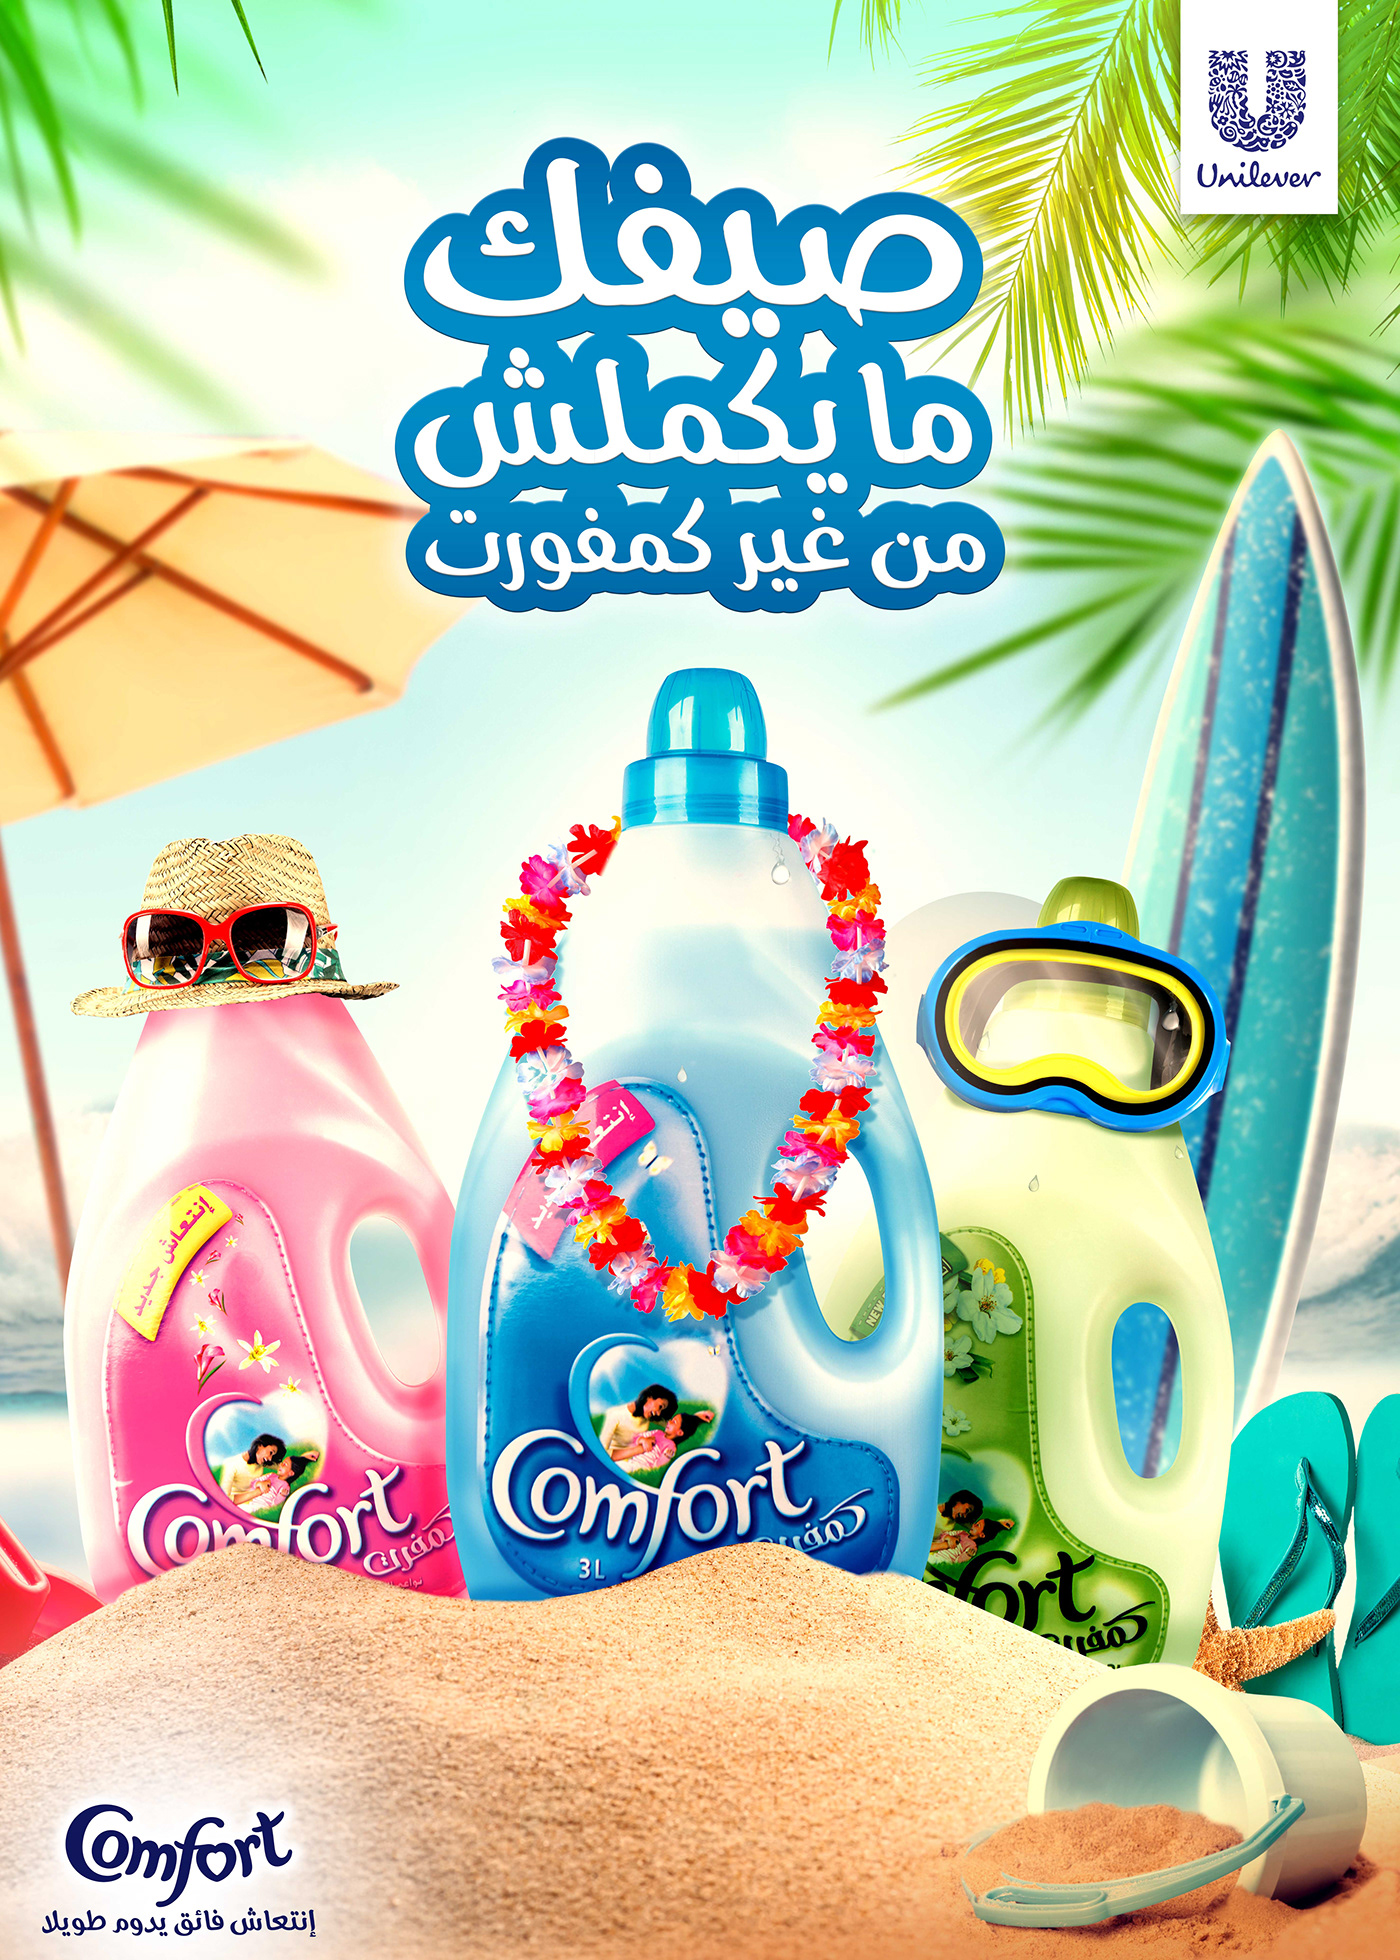 Your summer is better with comfort Middle East key visual campaign.